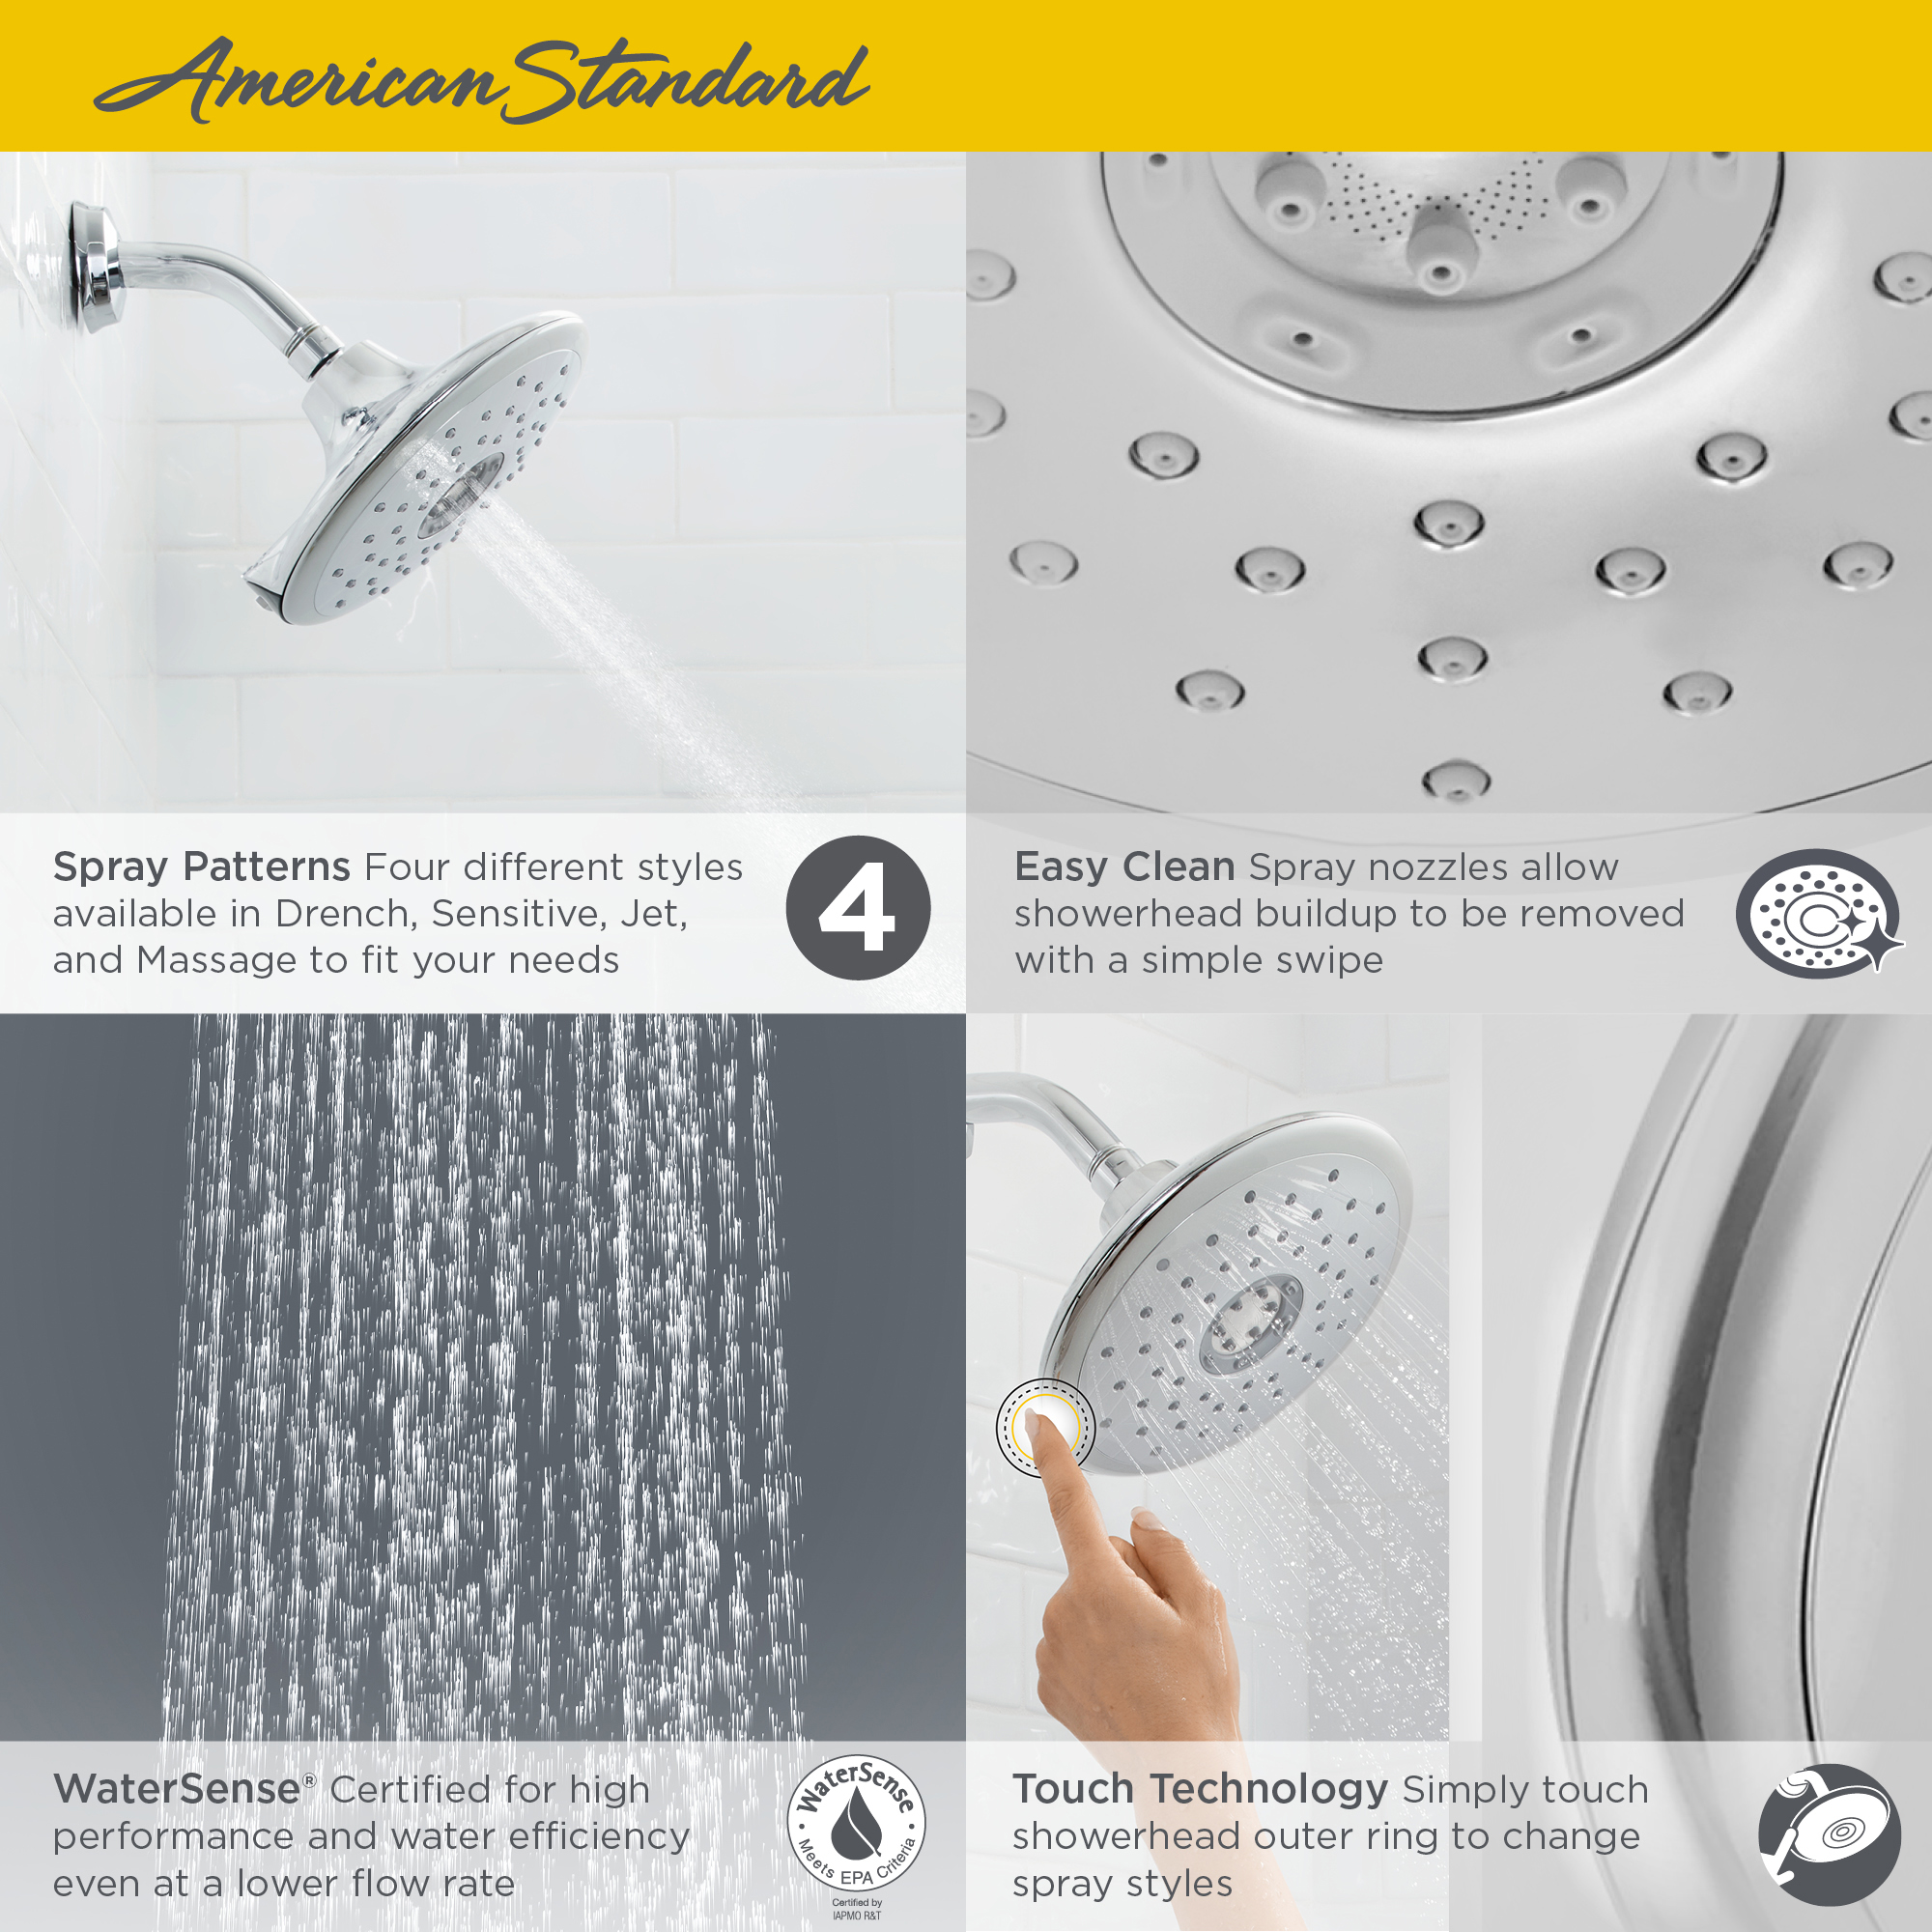 Spectra™ Touch 7-Inch 1.8 gpm/6.8 L/min Water-Saving Fixed Showerhead